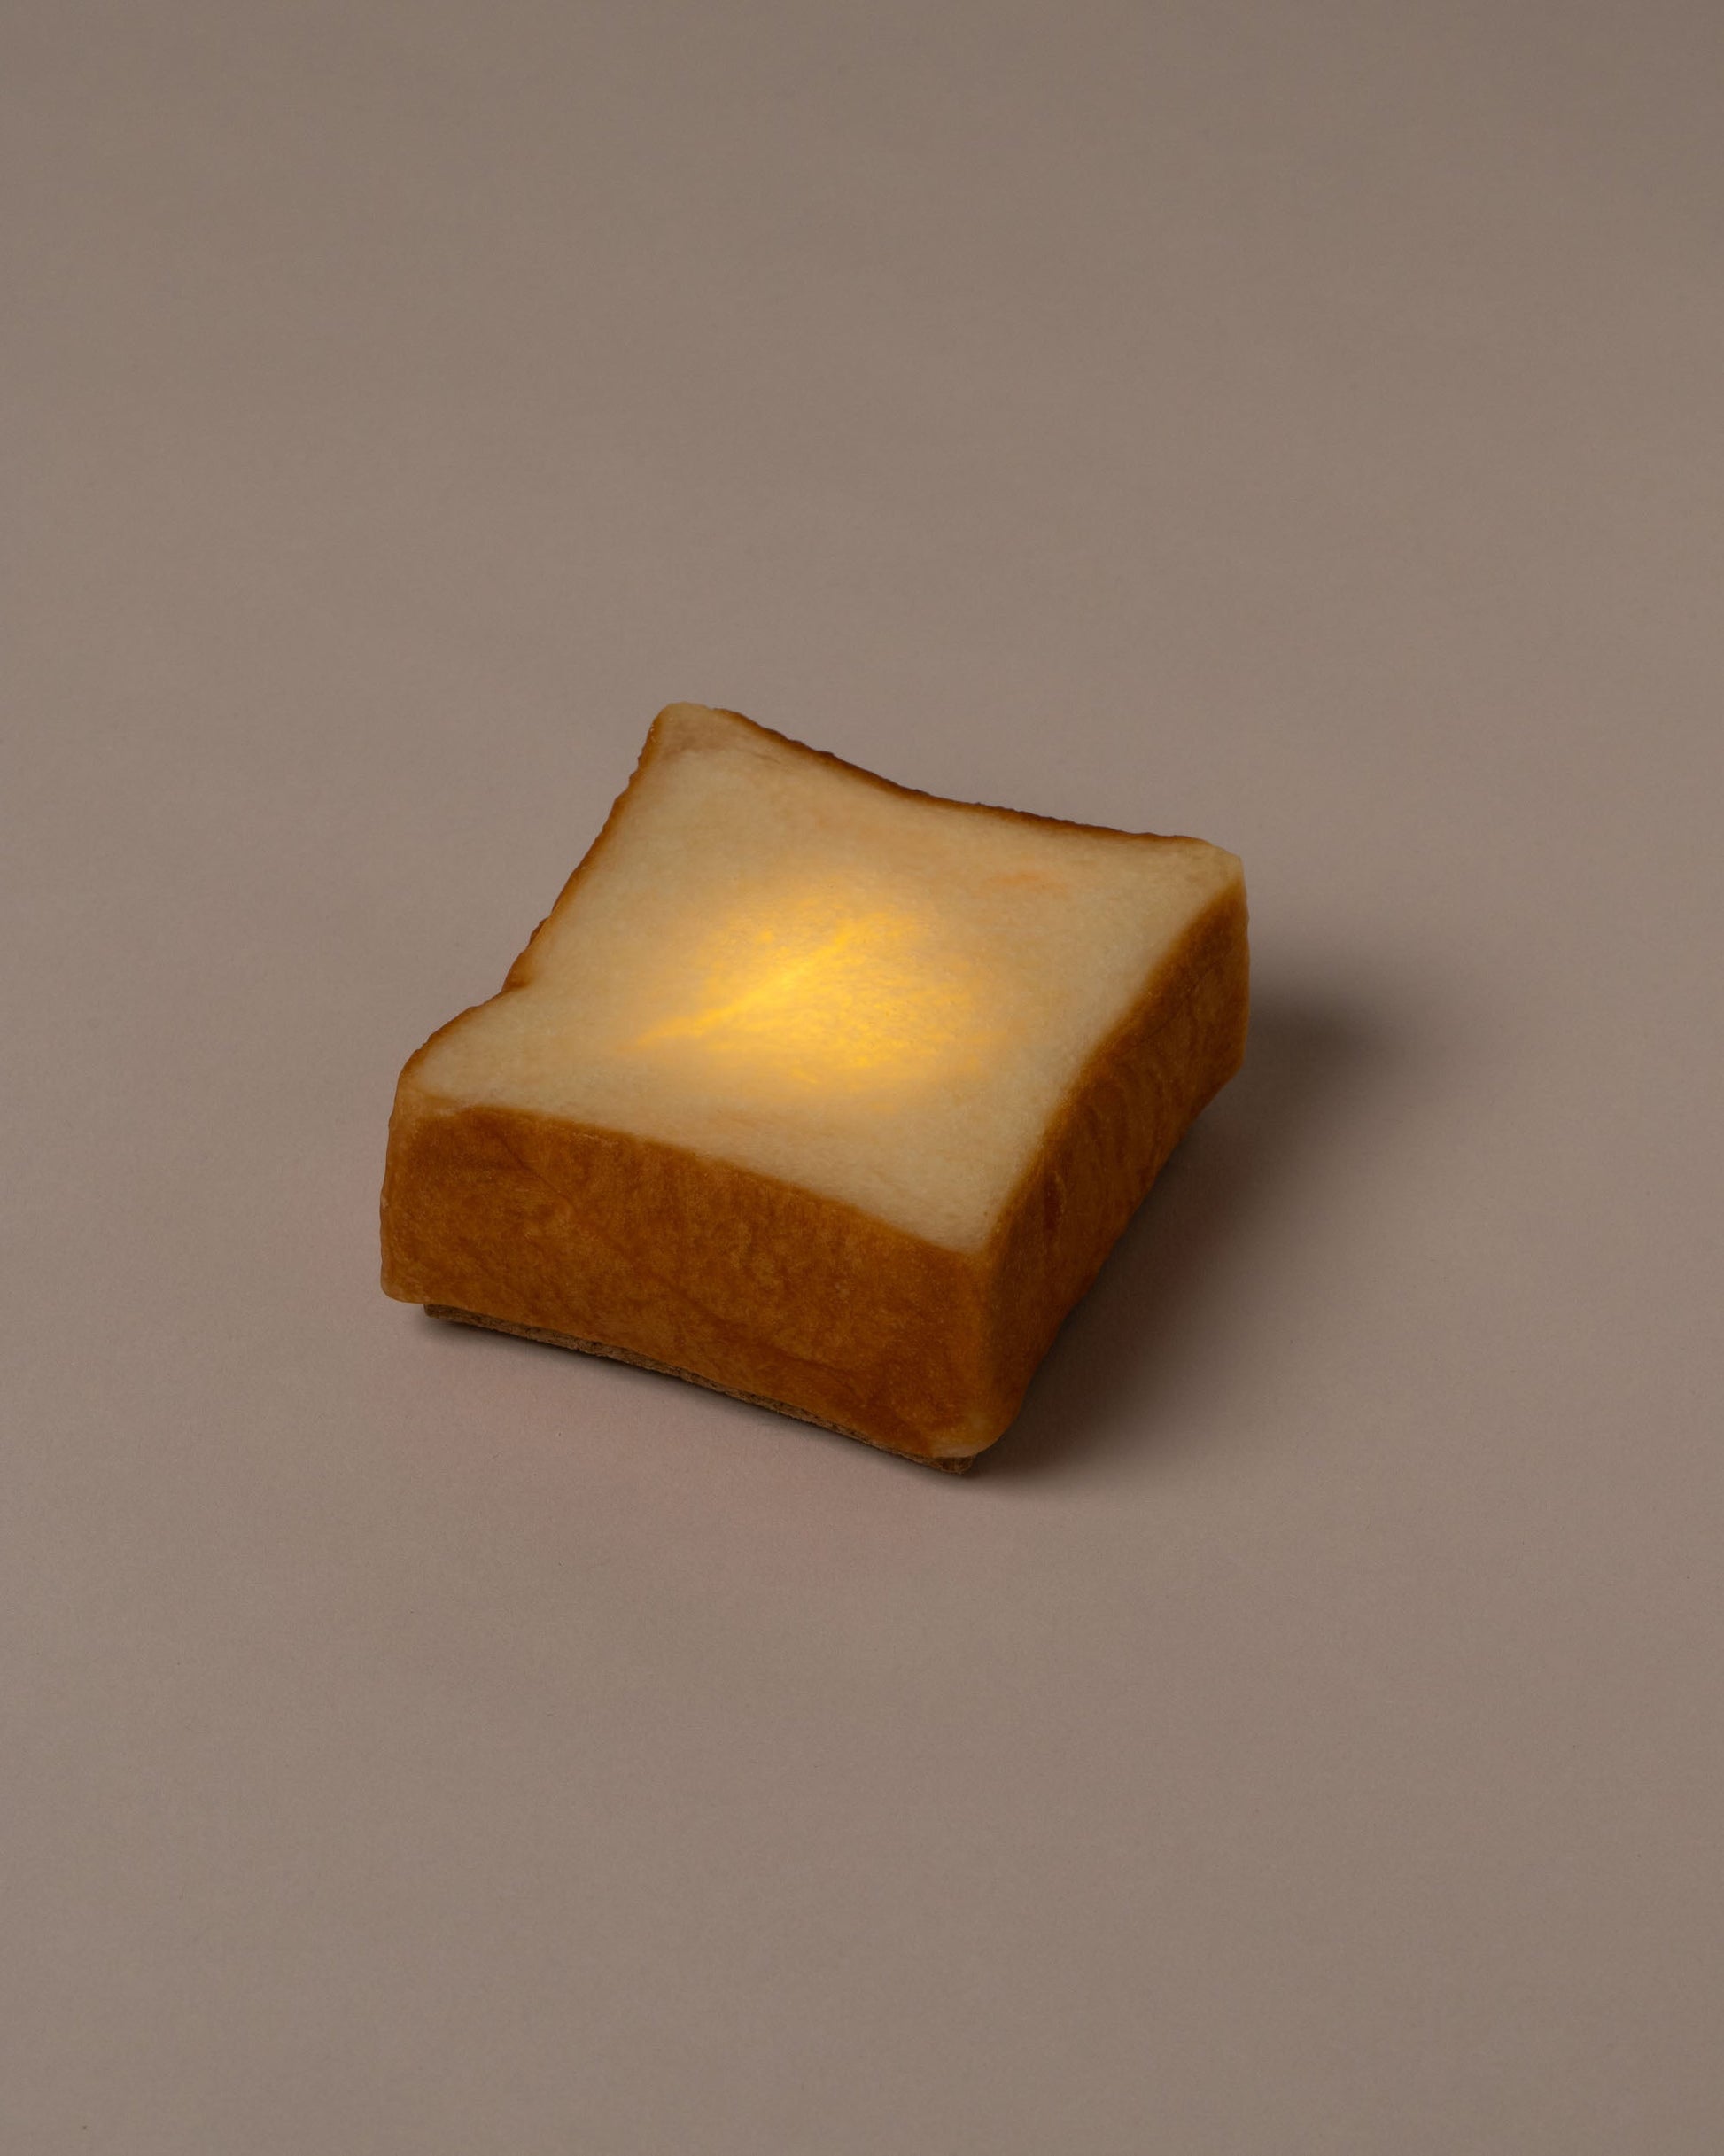 Toast-A Bread Lamp (Battery Powered LED Light)